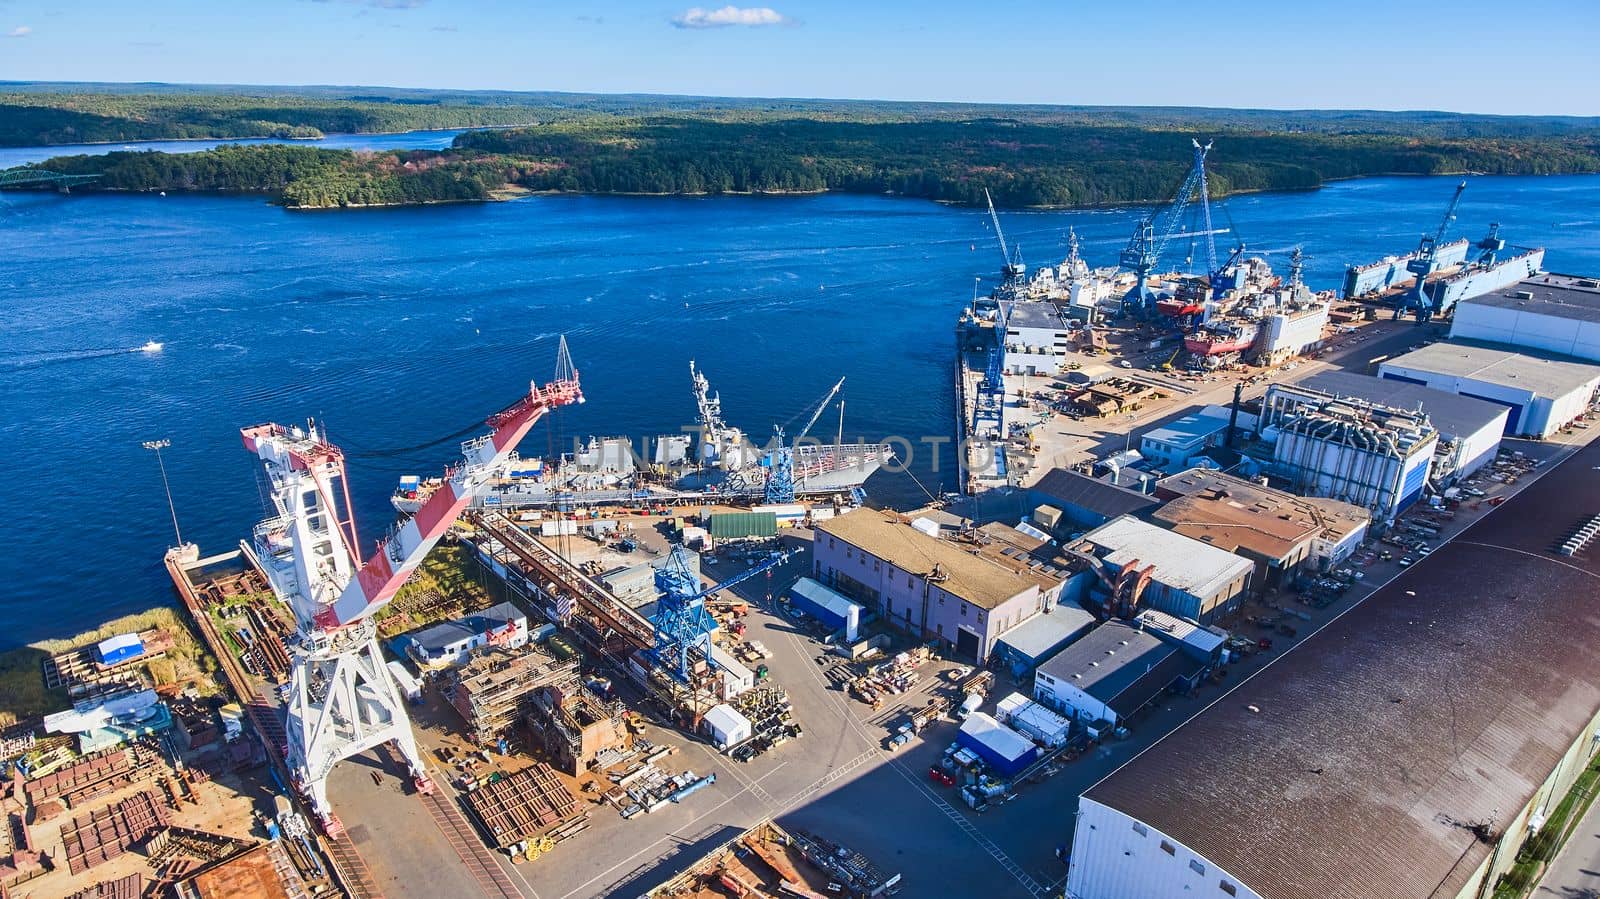 Shipyard on Maine river from above as many large ships are being built by njproductions